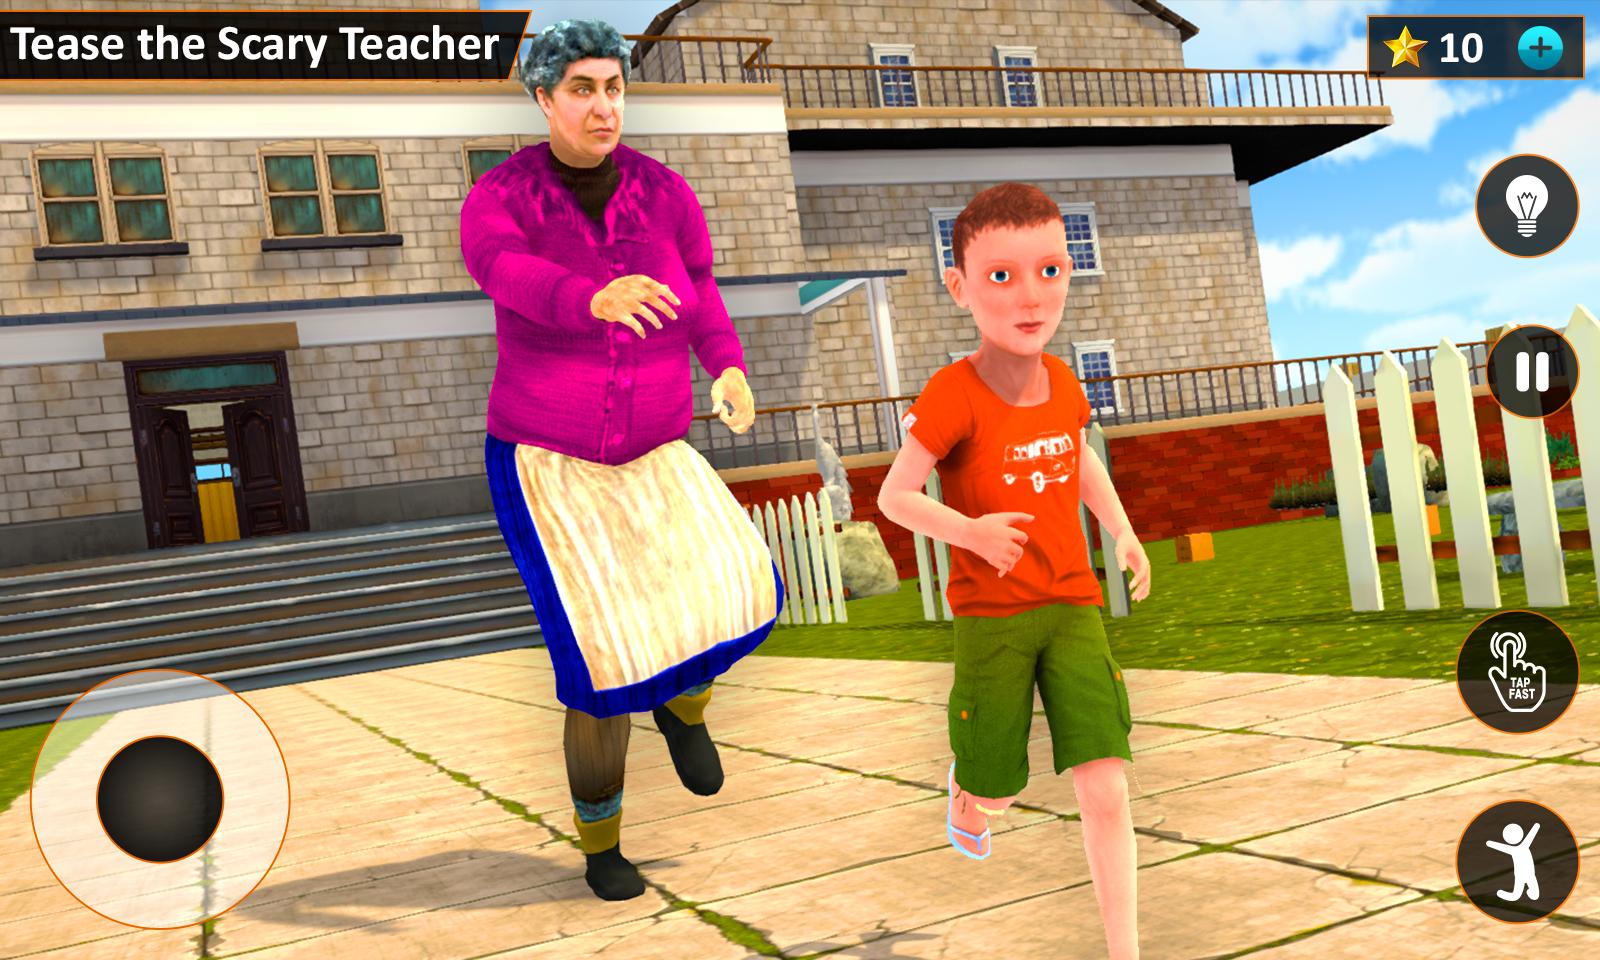 Download and play Scare Scary Bad Teacher 3D on PC with MuMu Player